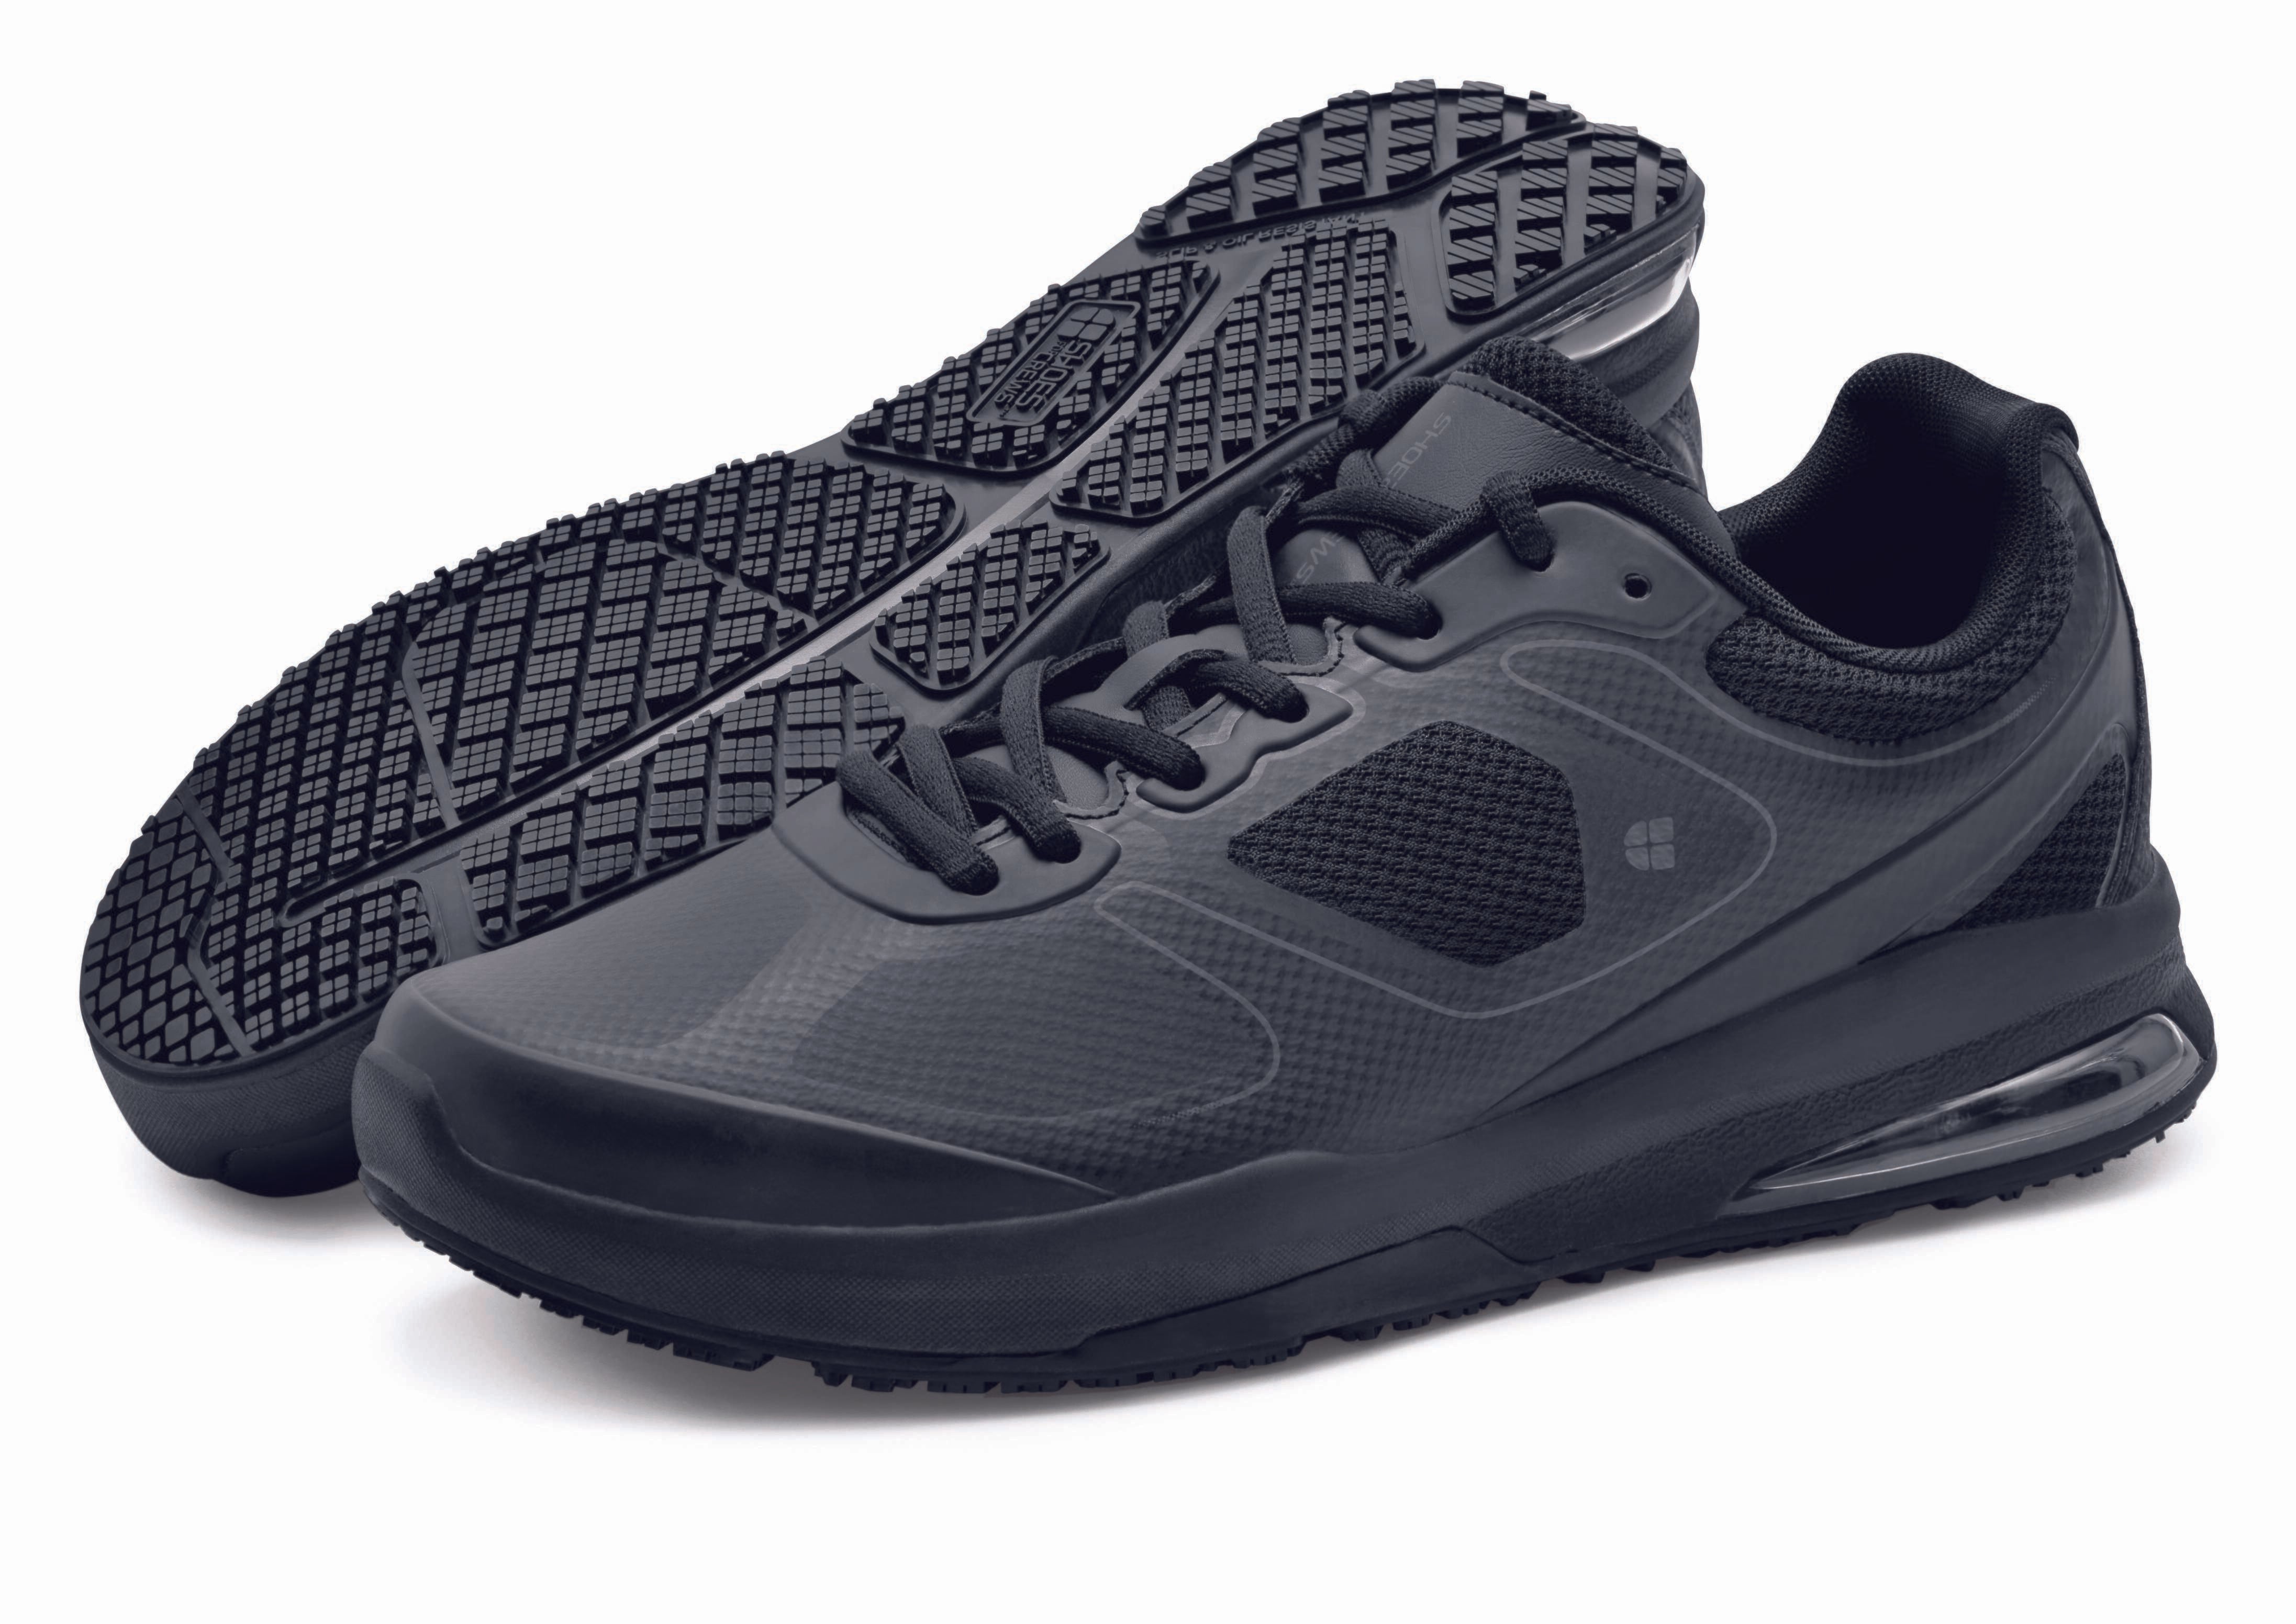 The Revolution II from Shoes For Crews are slip-resistant trainers designed to provide comfort, pair seen from the left side and the sole.